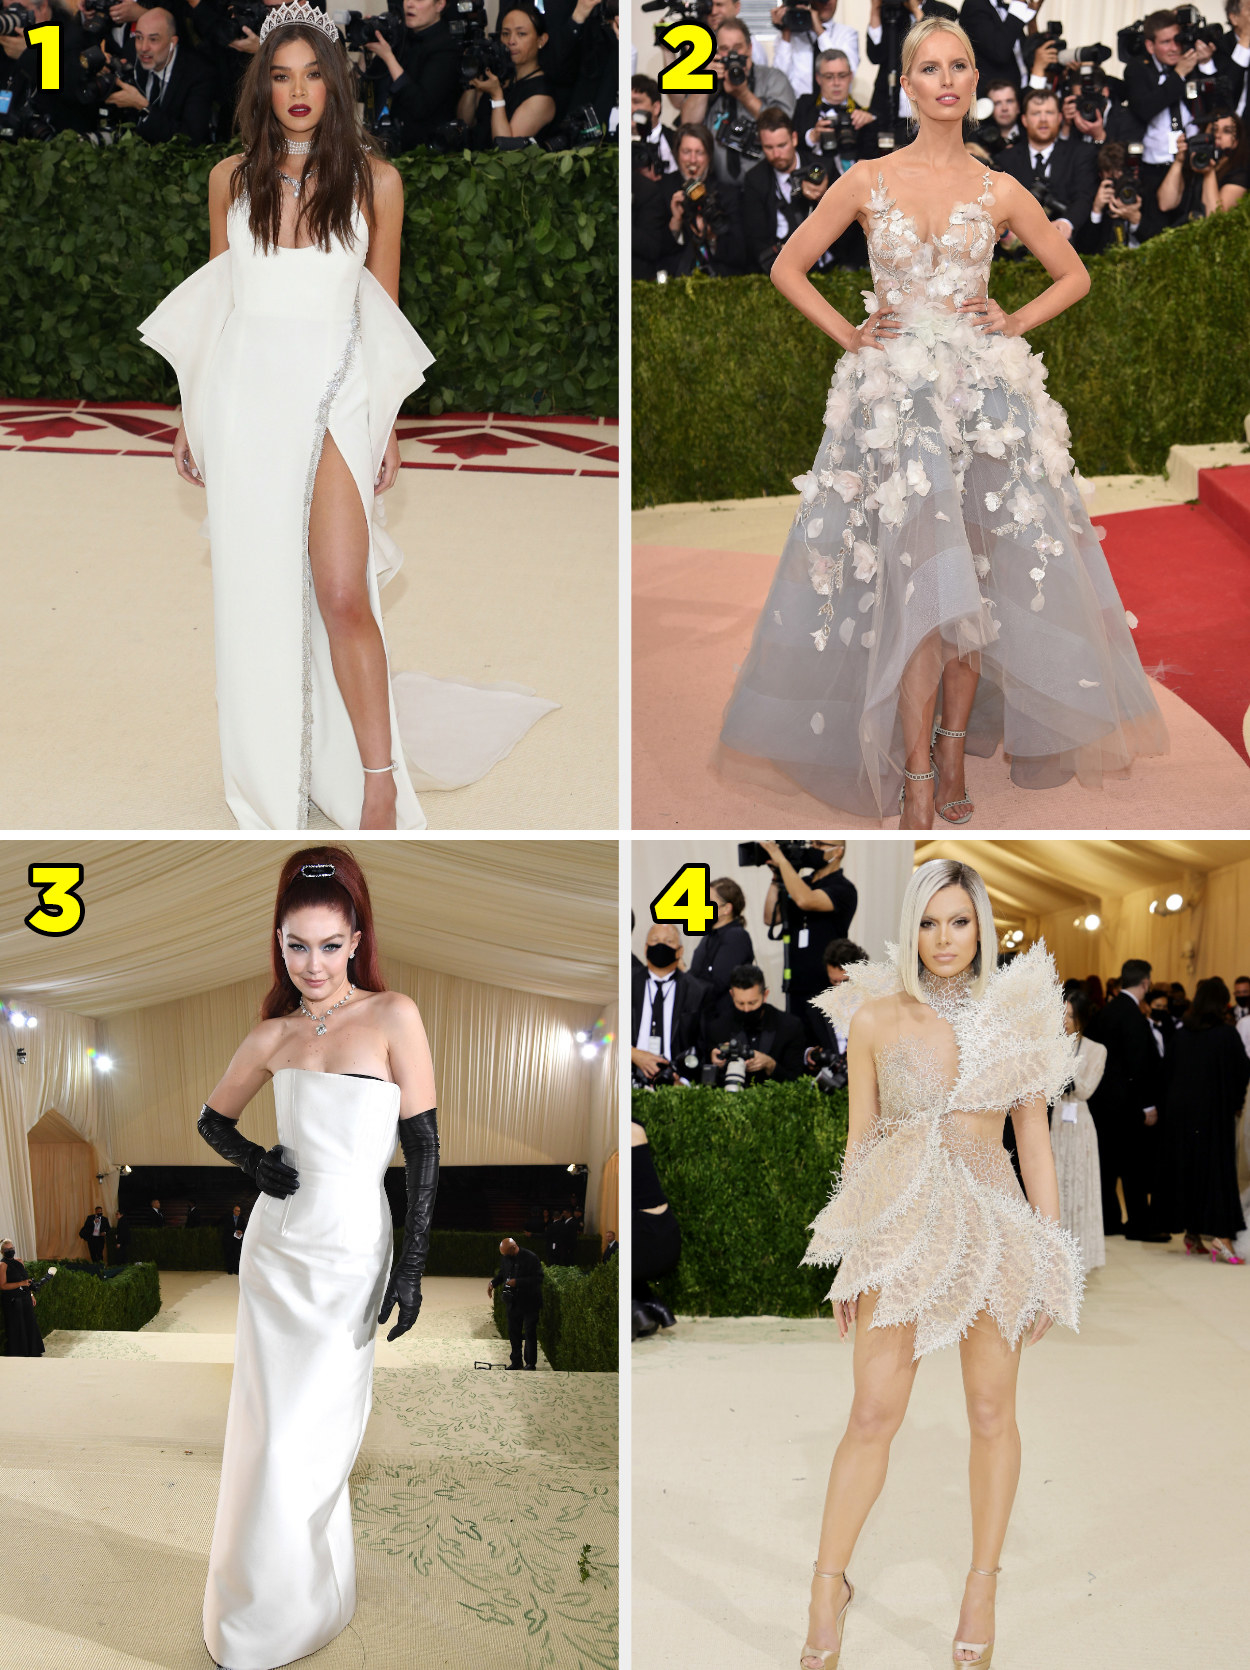 1. A gown with a thigh slit and a crown. 2. A strapless gown with floral appliques. 3. A strapless gown with long gloves. 4. A short dress that&#x27;s meant to look like feathers.